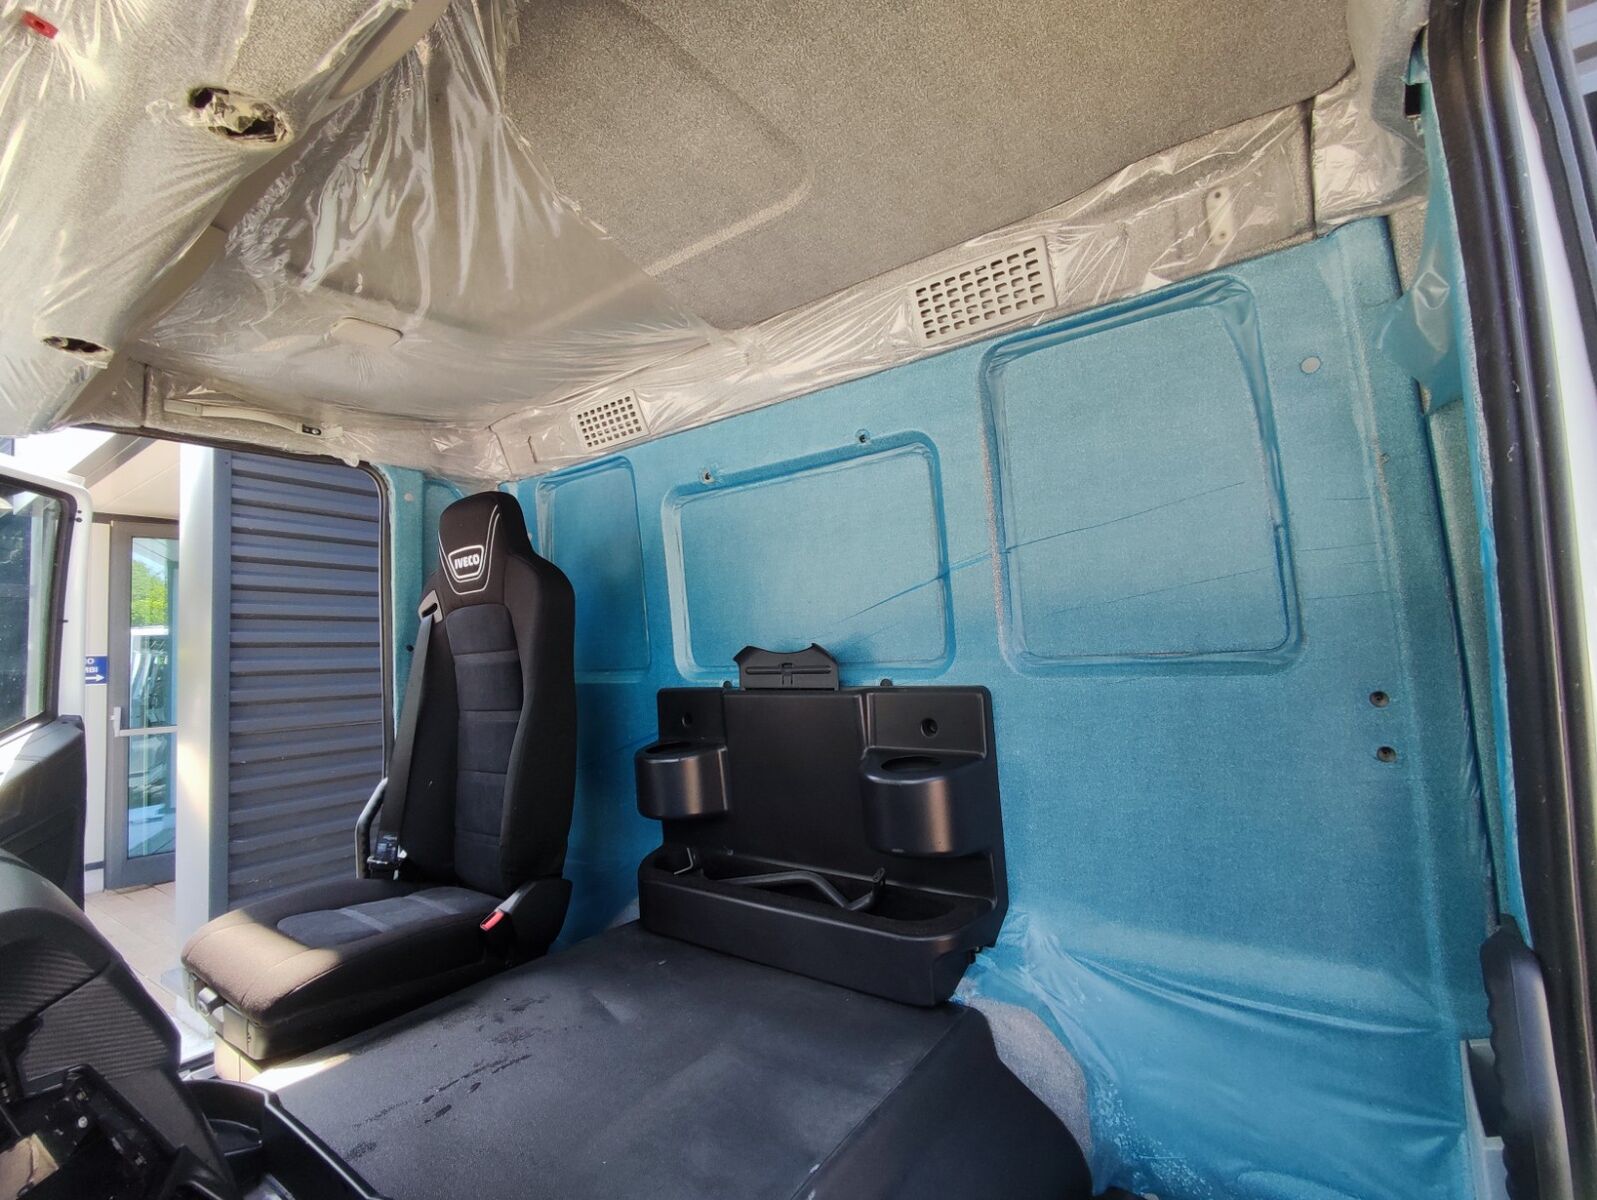 cabin IVECO STRALIS HI STREET - TRAKKER Euro 6 for truck tractor IVECO DAY CAB